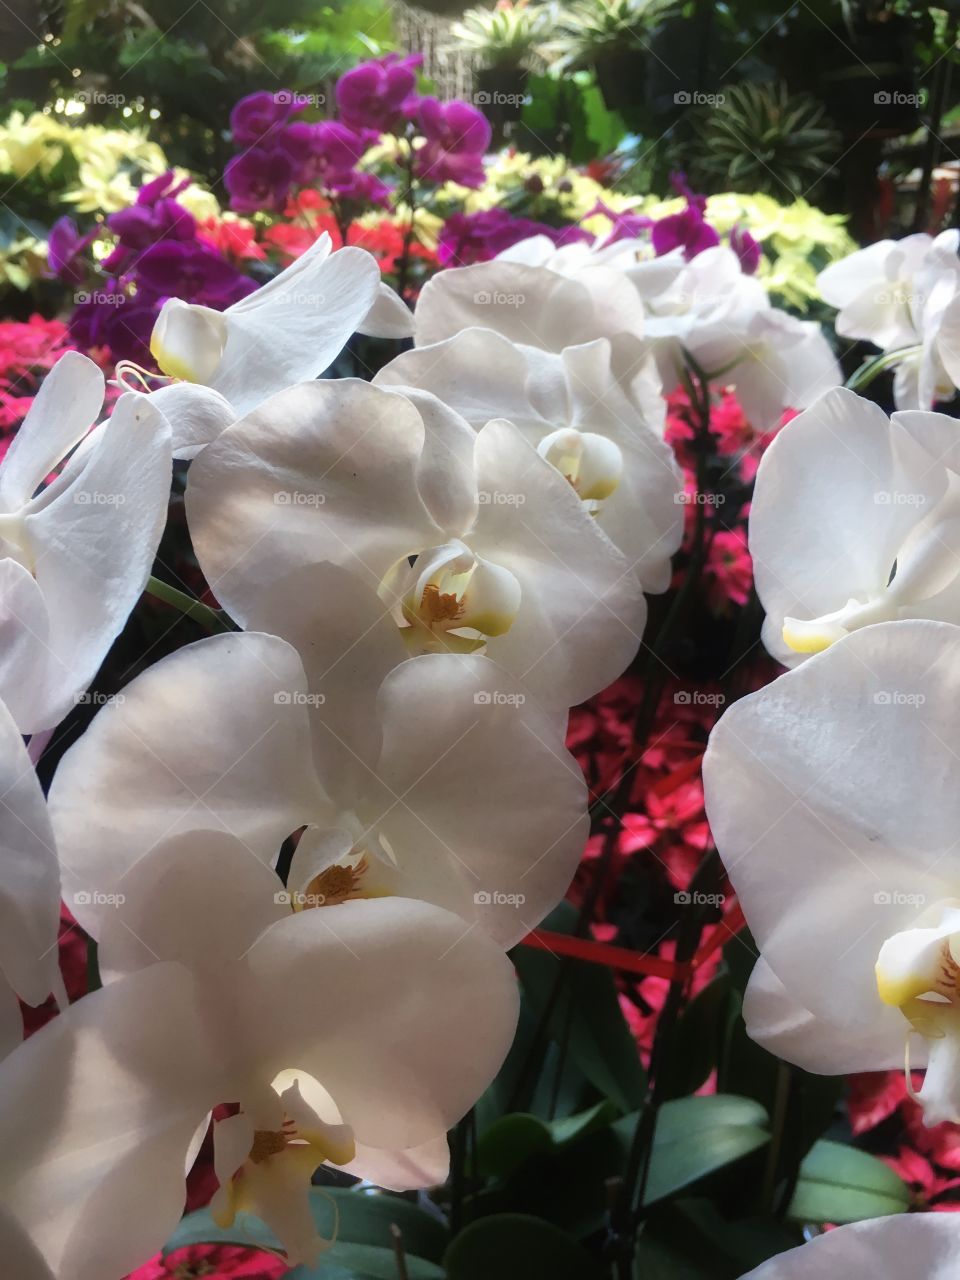 drowning in a sea of orchids 